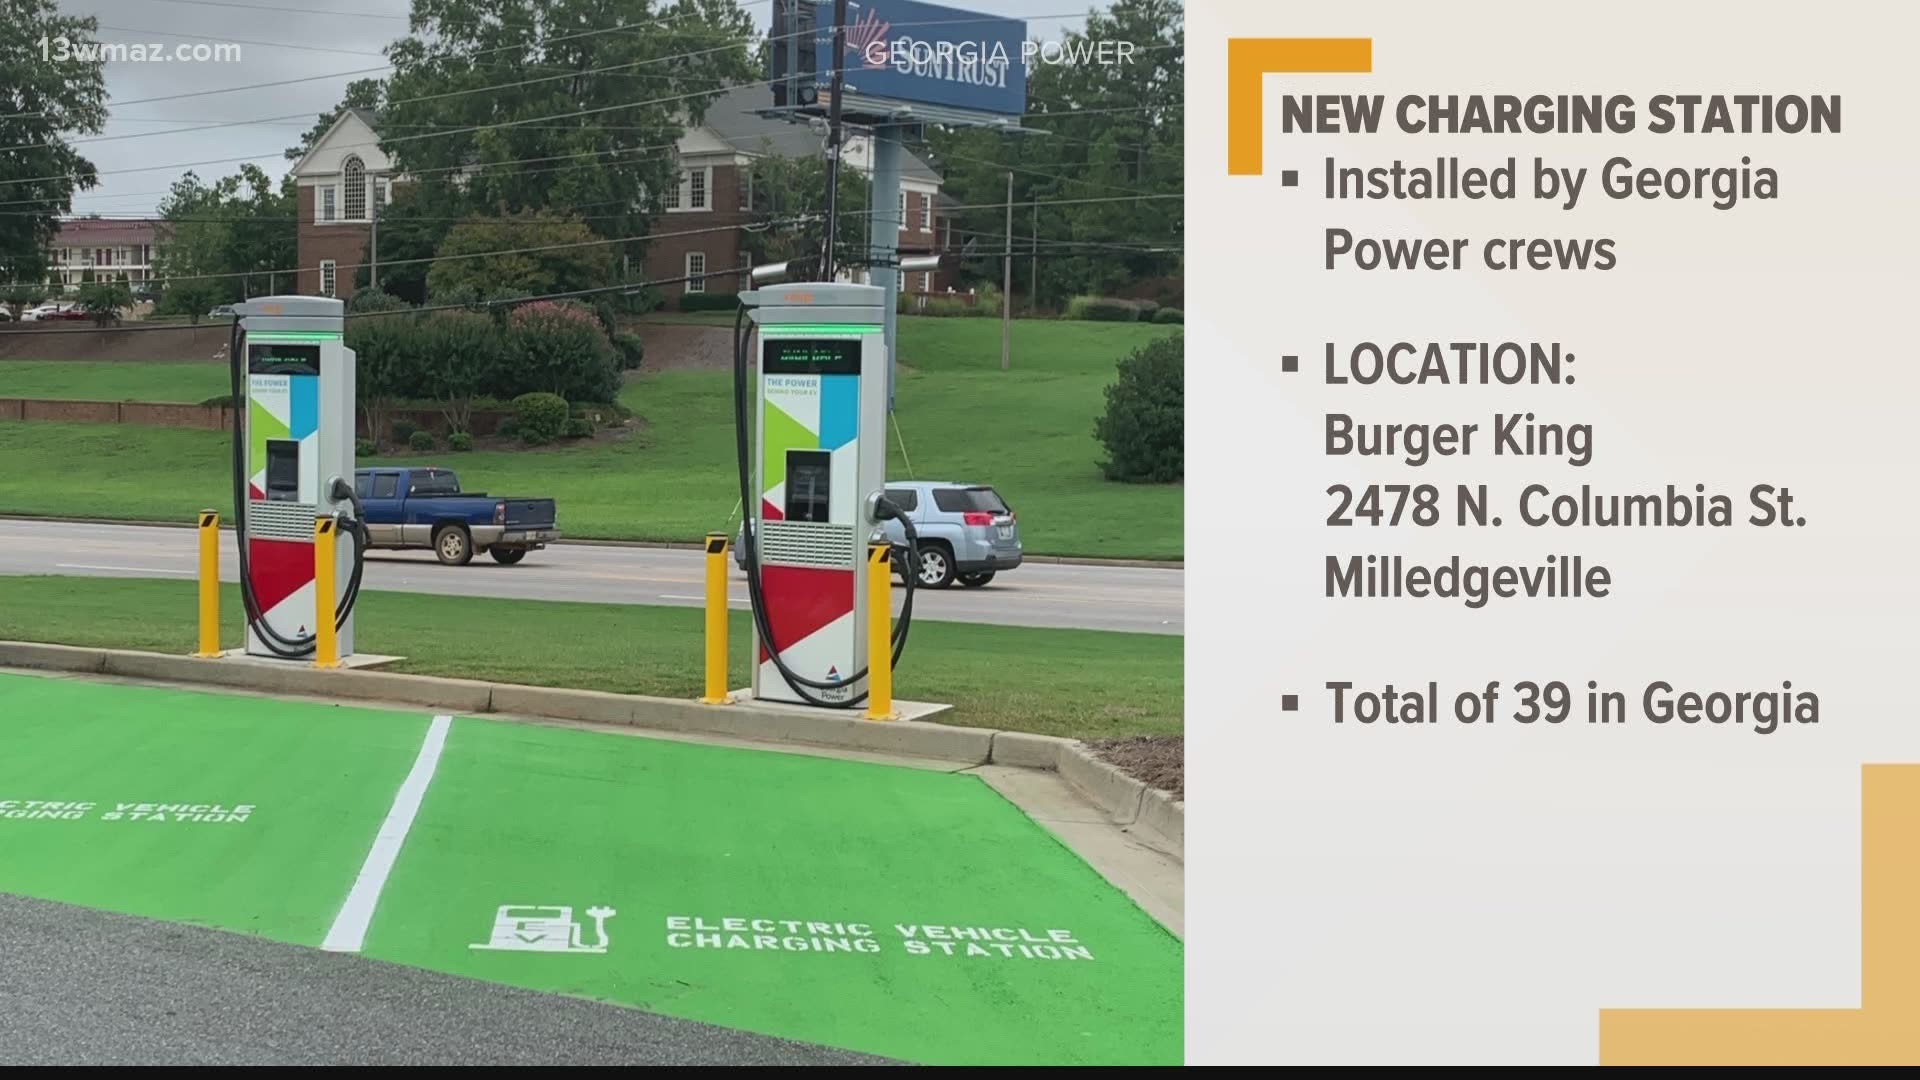 Over the next three years, Georgia Power will place 39 more EV chargers across the state.